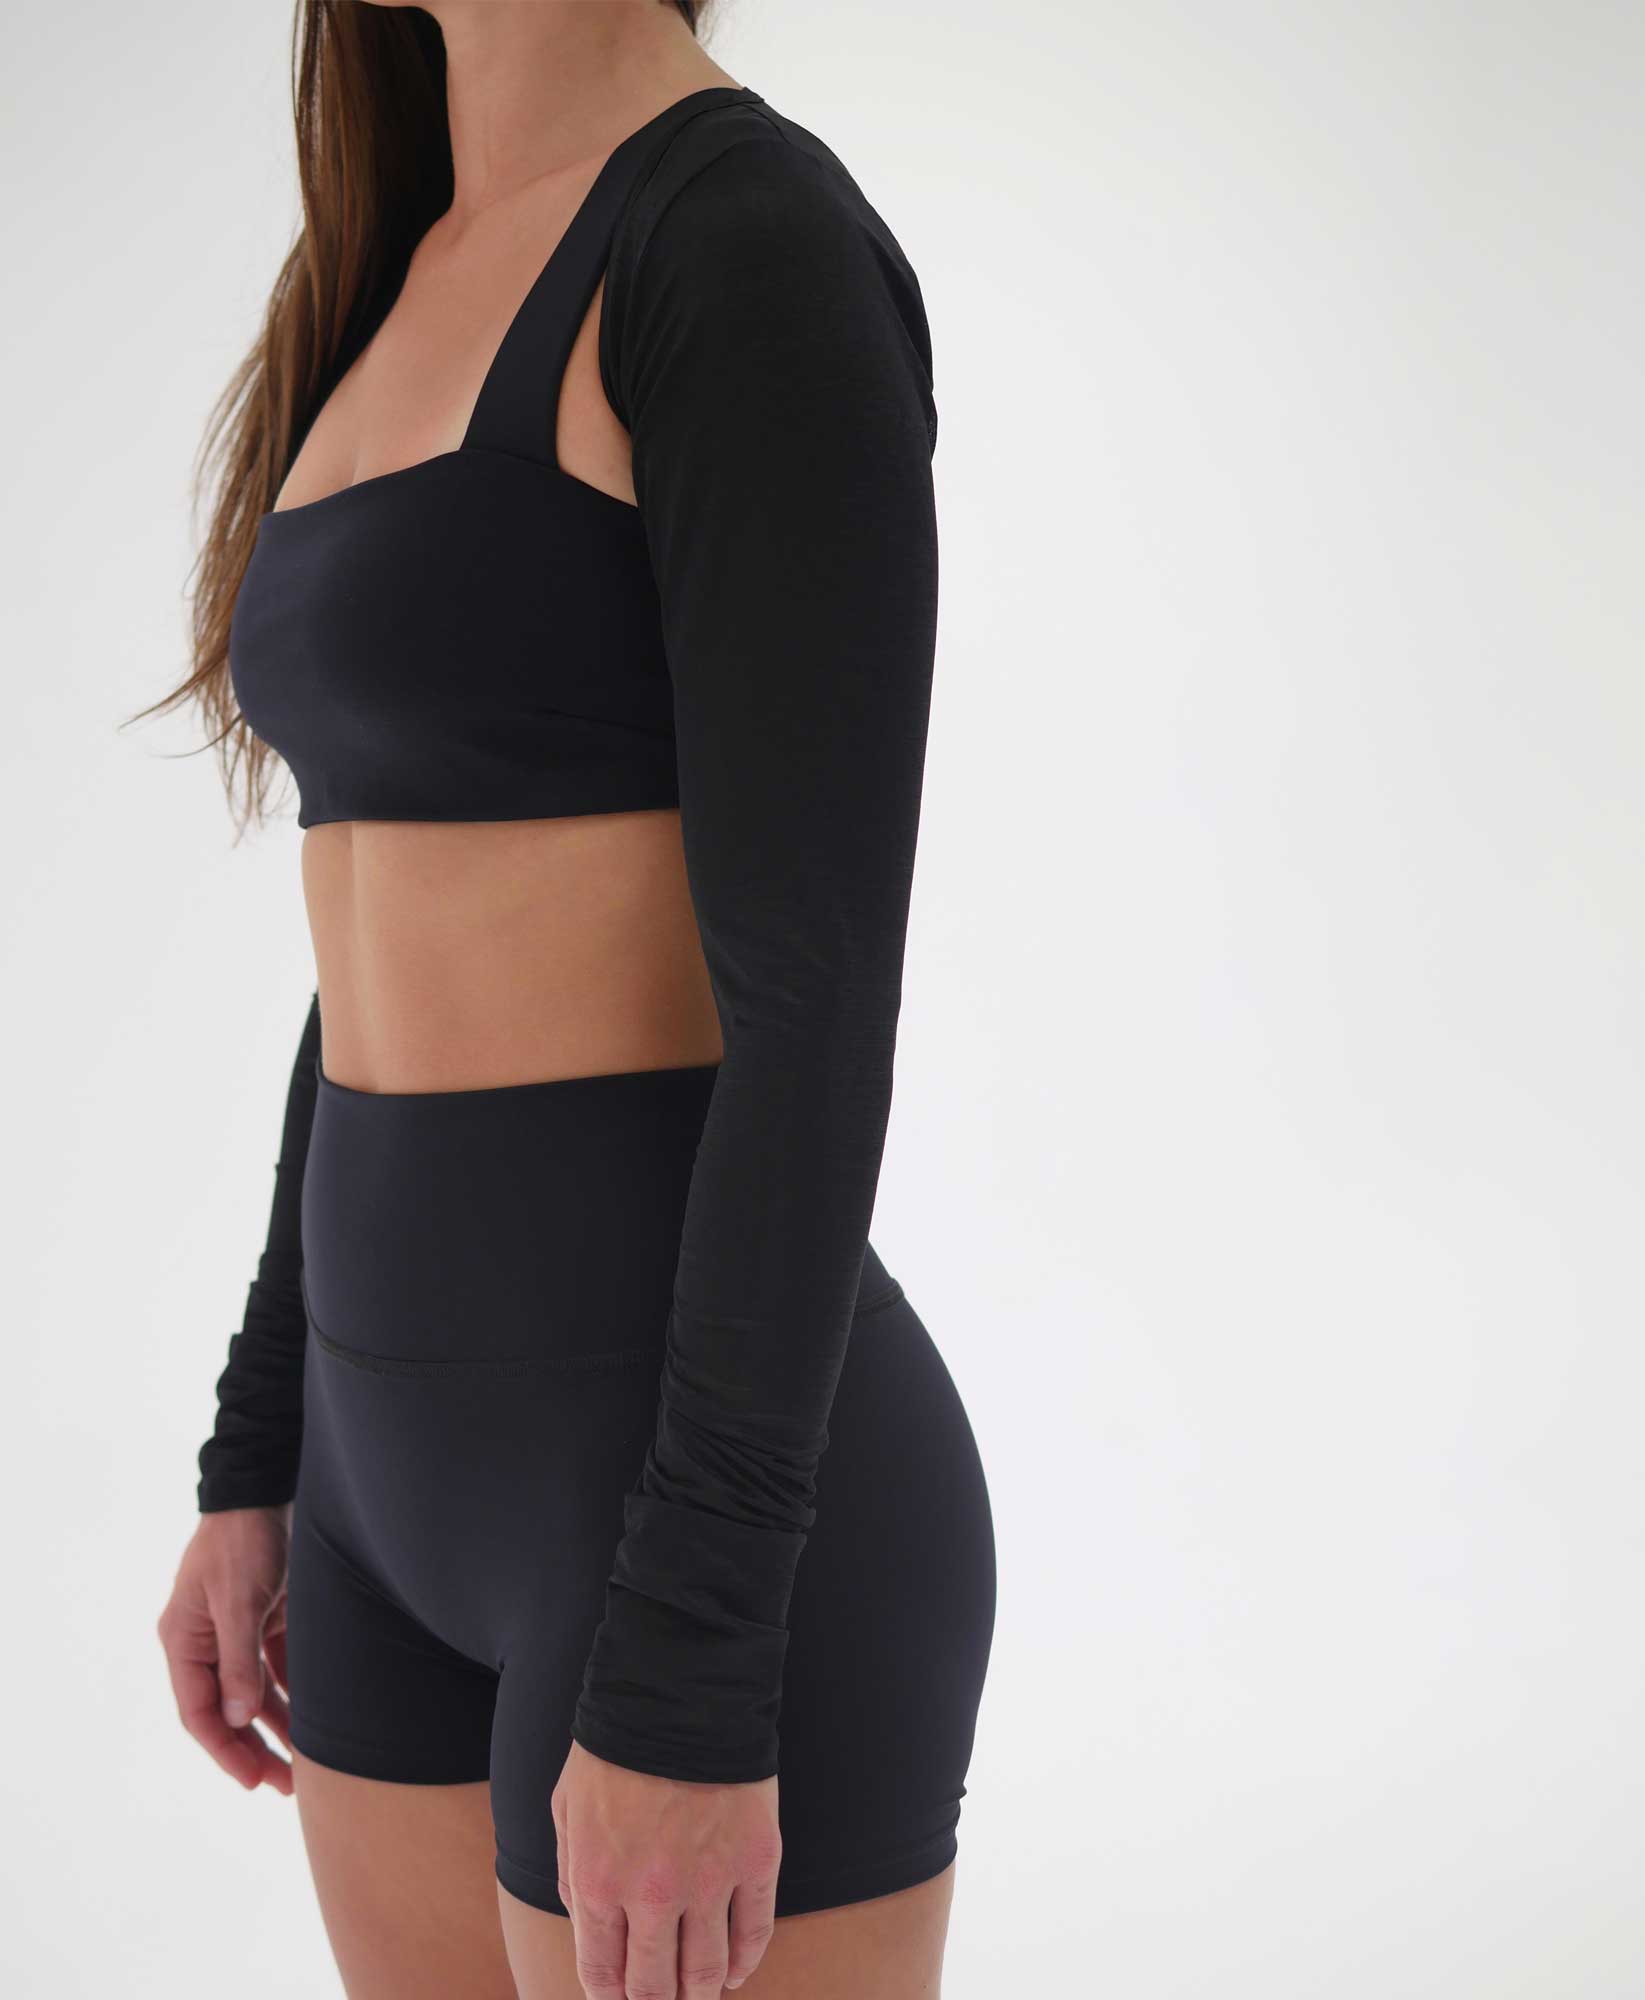 Wear One's At The Scrunch Shrug in Goji Black on model cropped side view